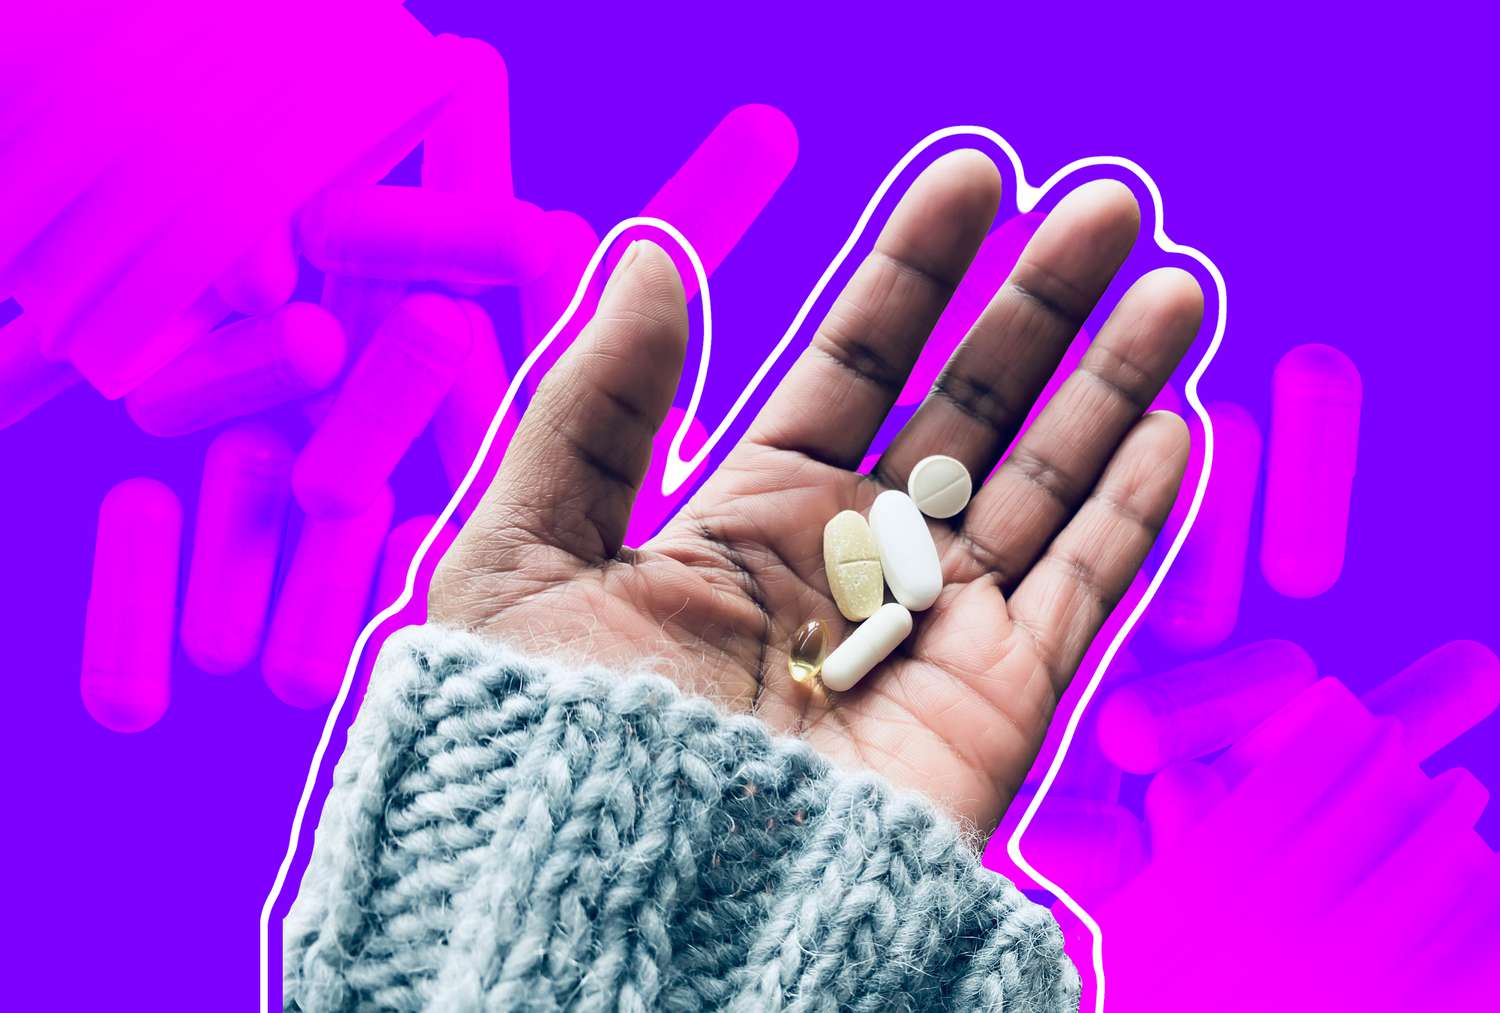 supplements in a hand